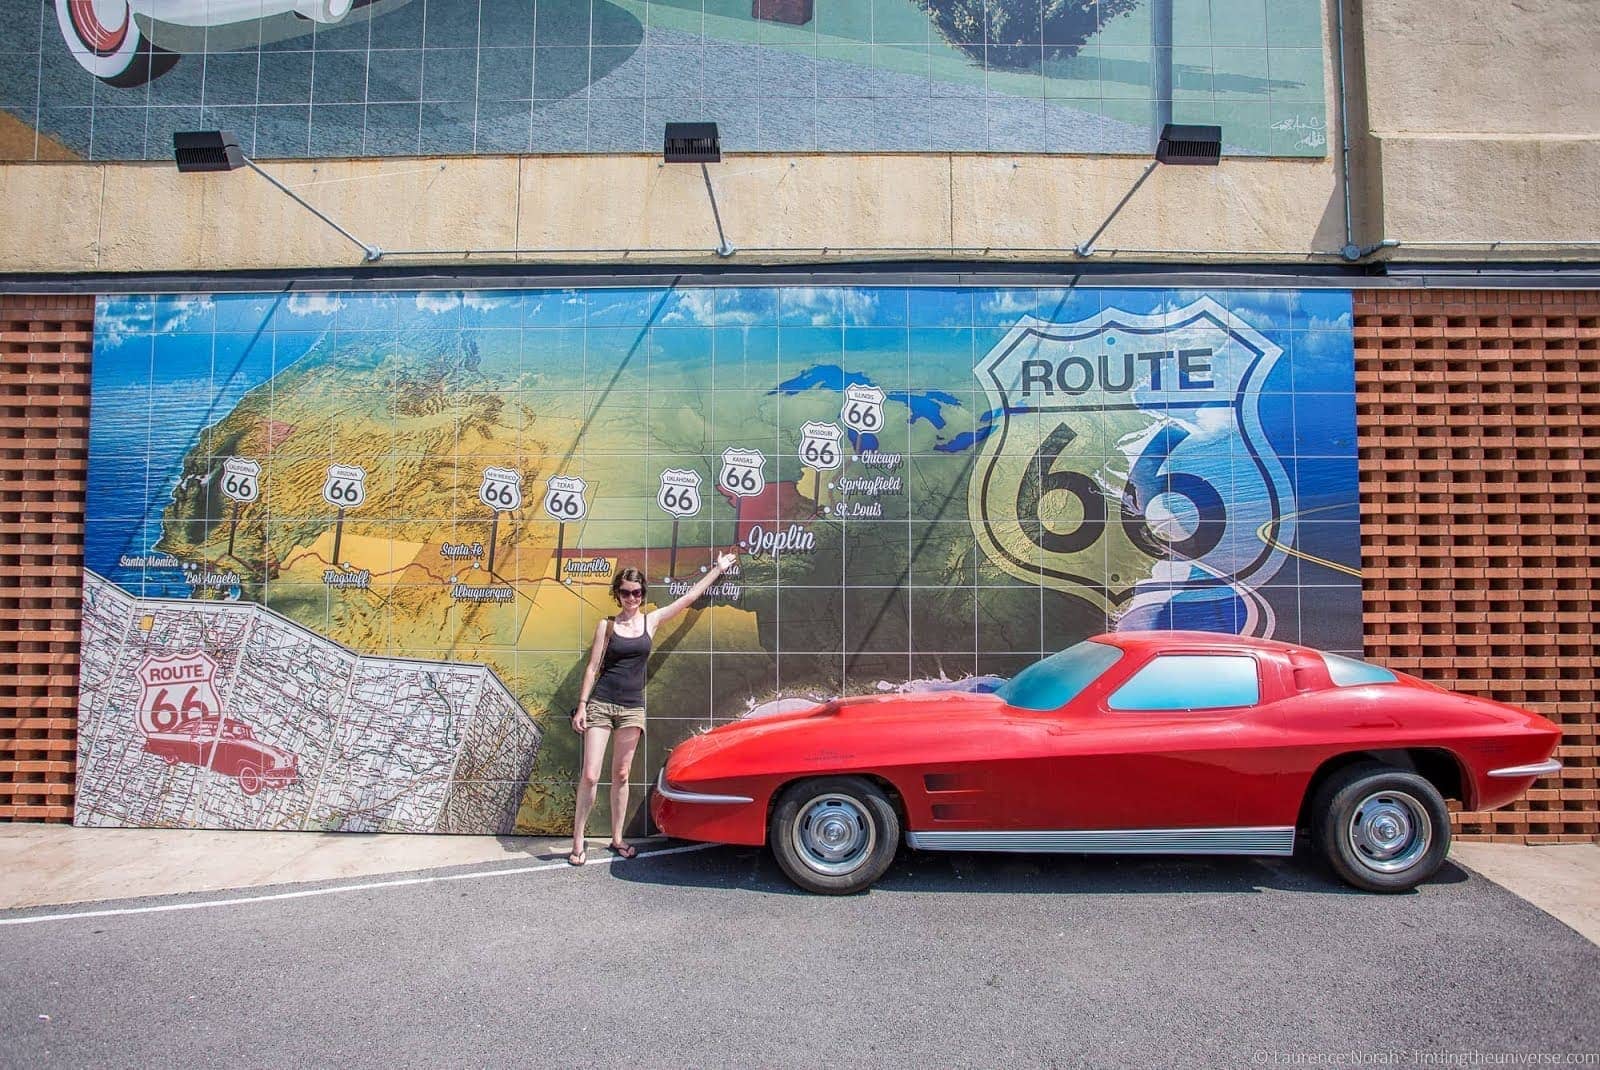 Route 66 in Missouri - All the highlights!